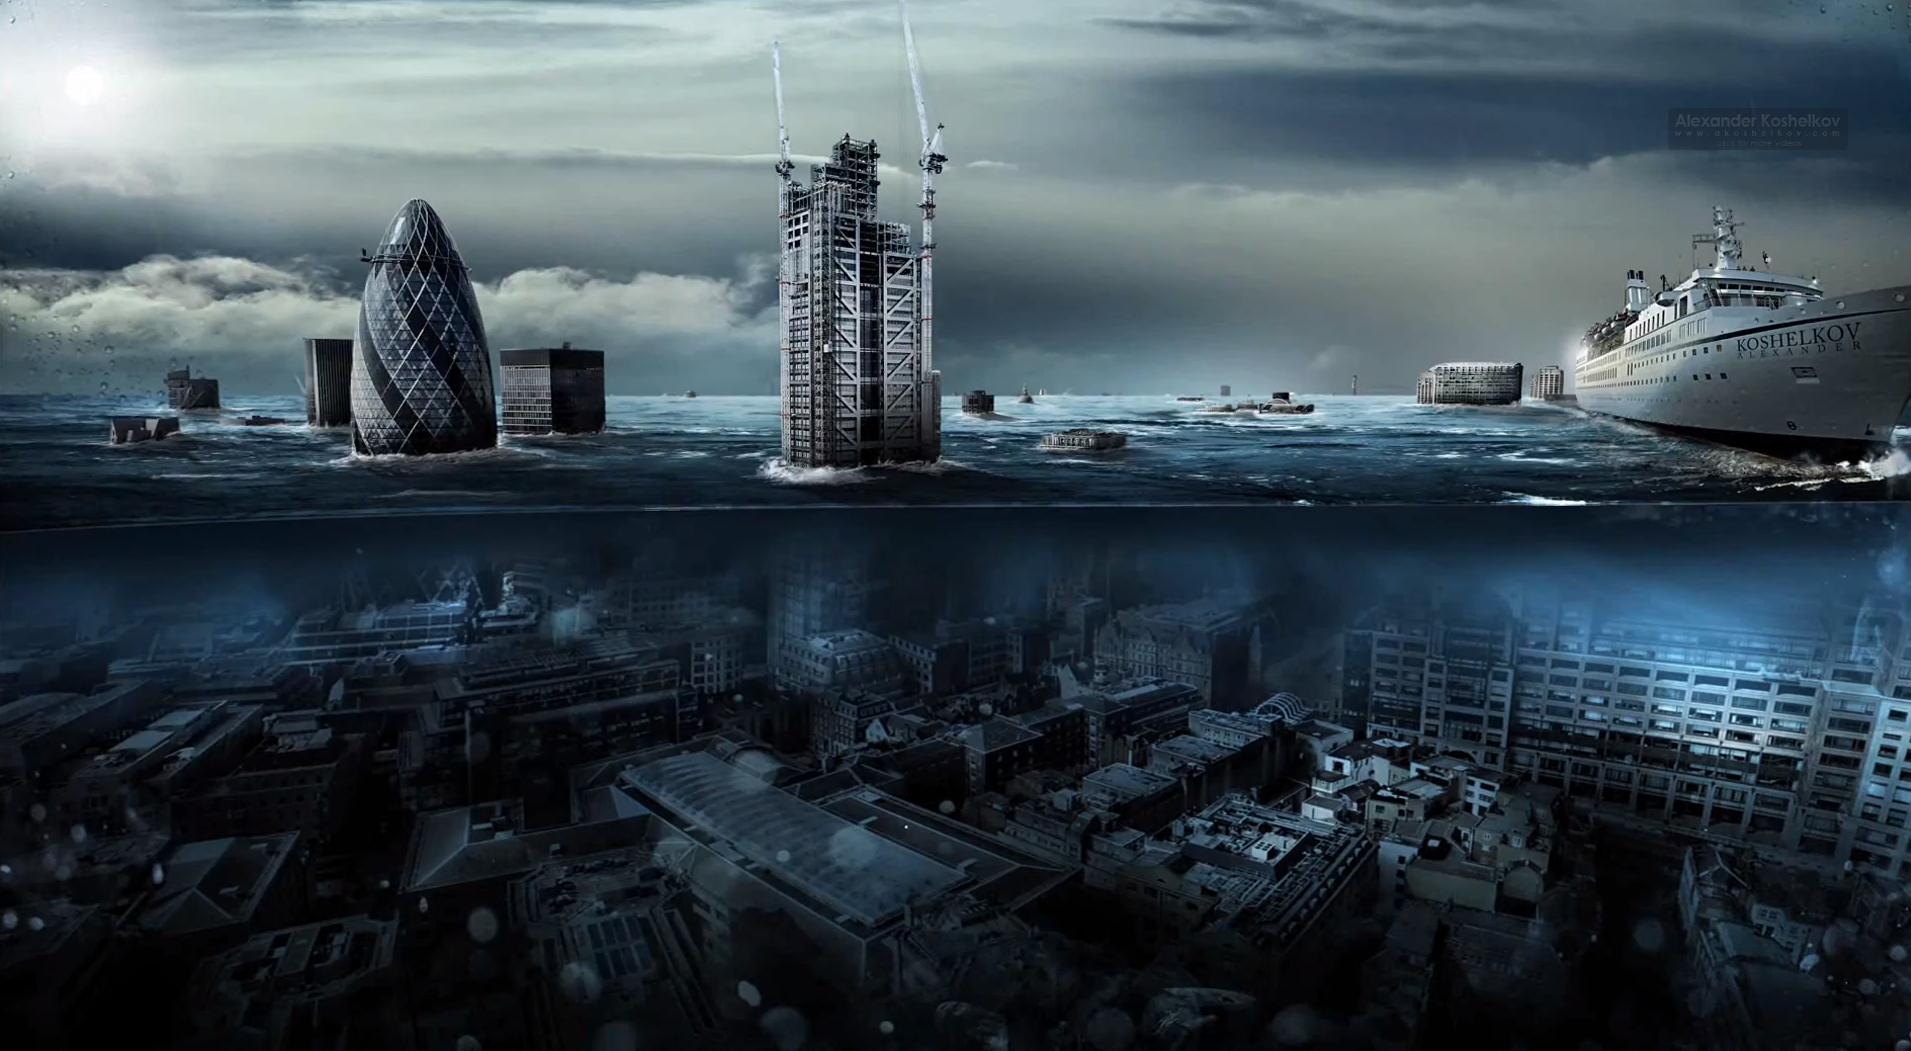 Where Can I Find More Like This? (Cities Underwater, Destroyed Abandoned Cities, Post Apocalypse, Etc.)